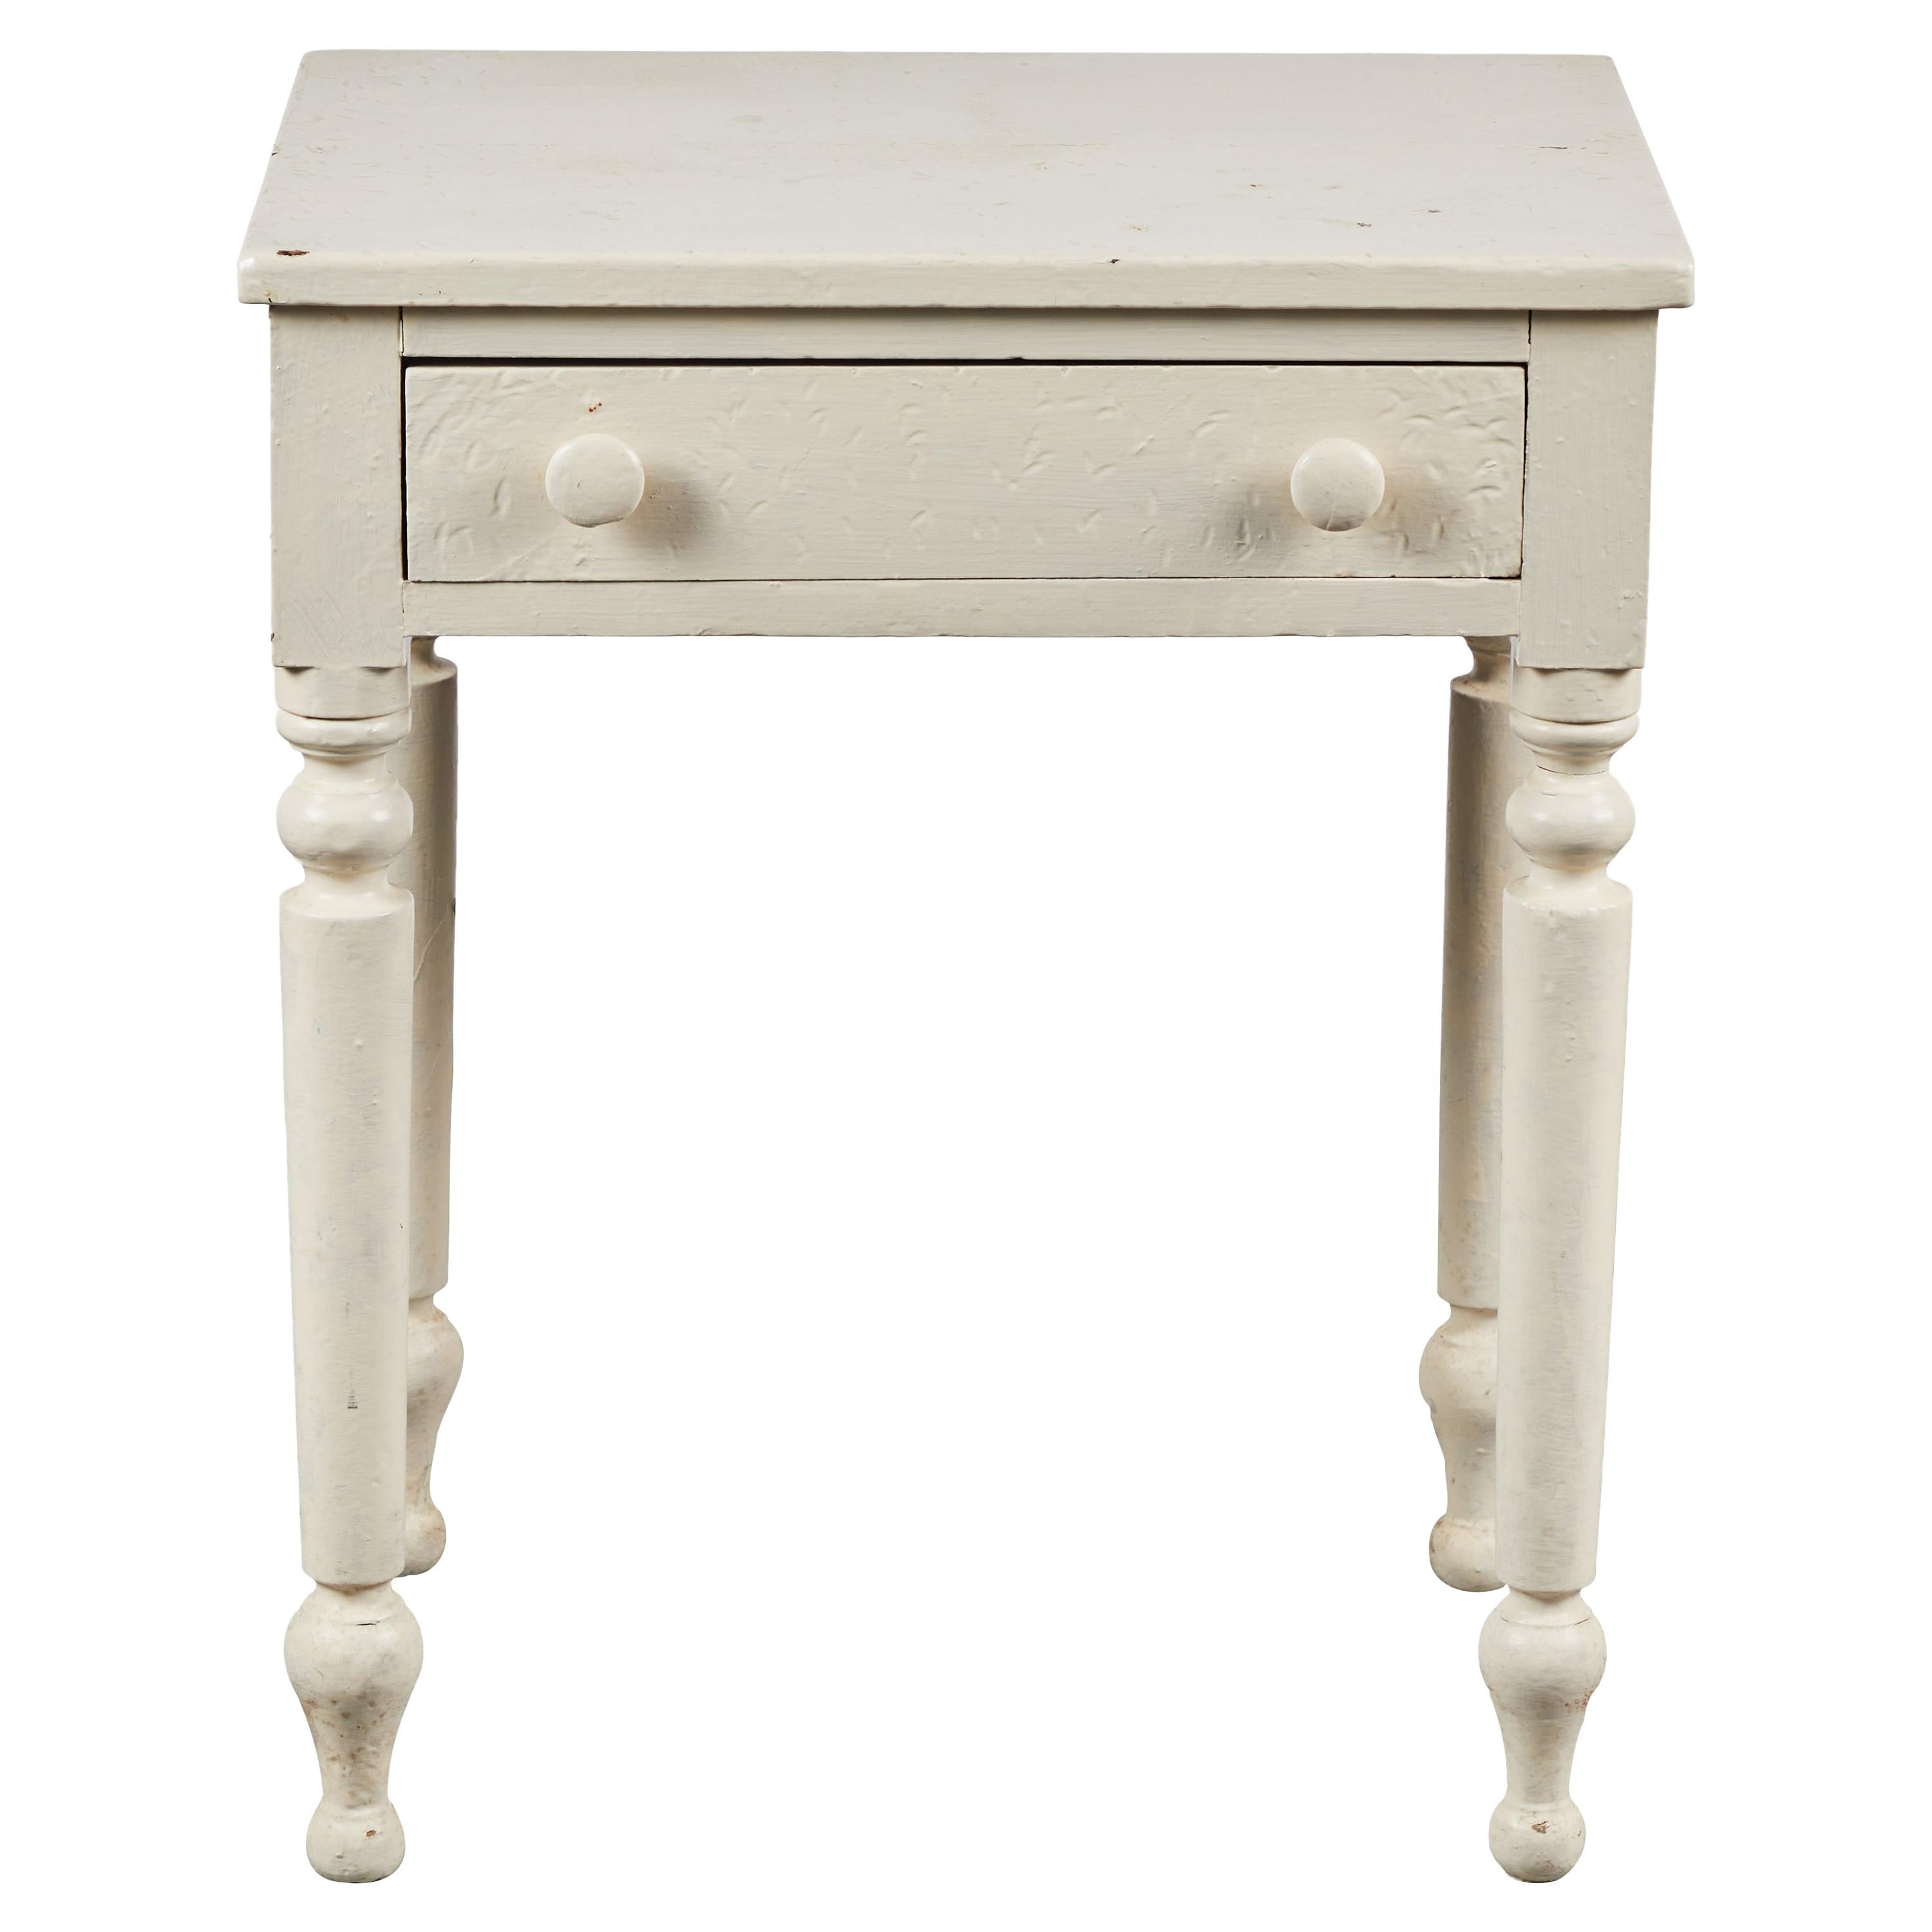 Early American White Painted Side Table